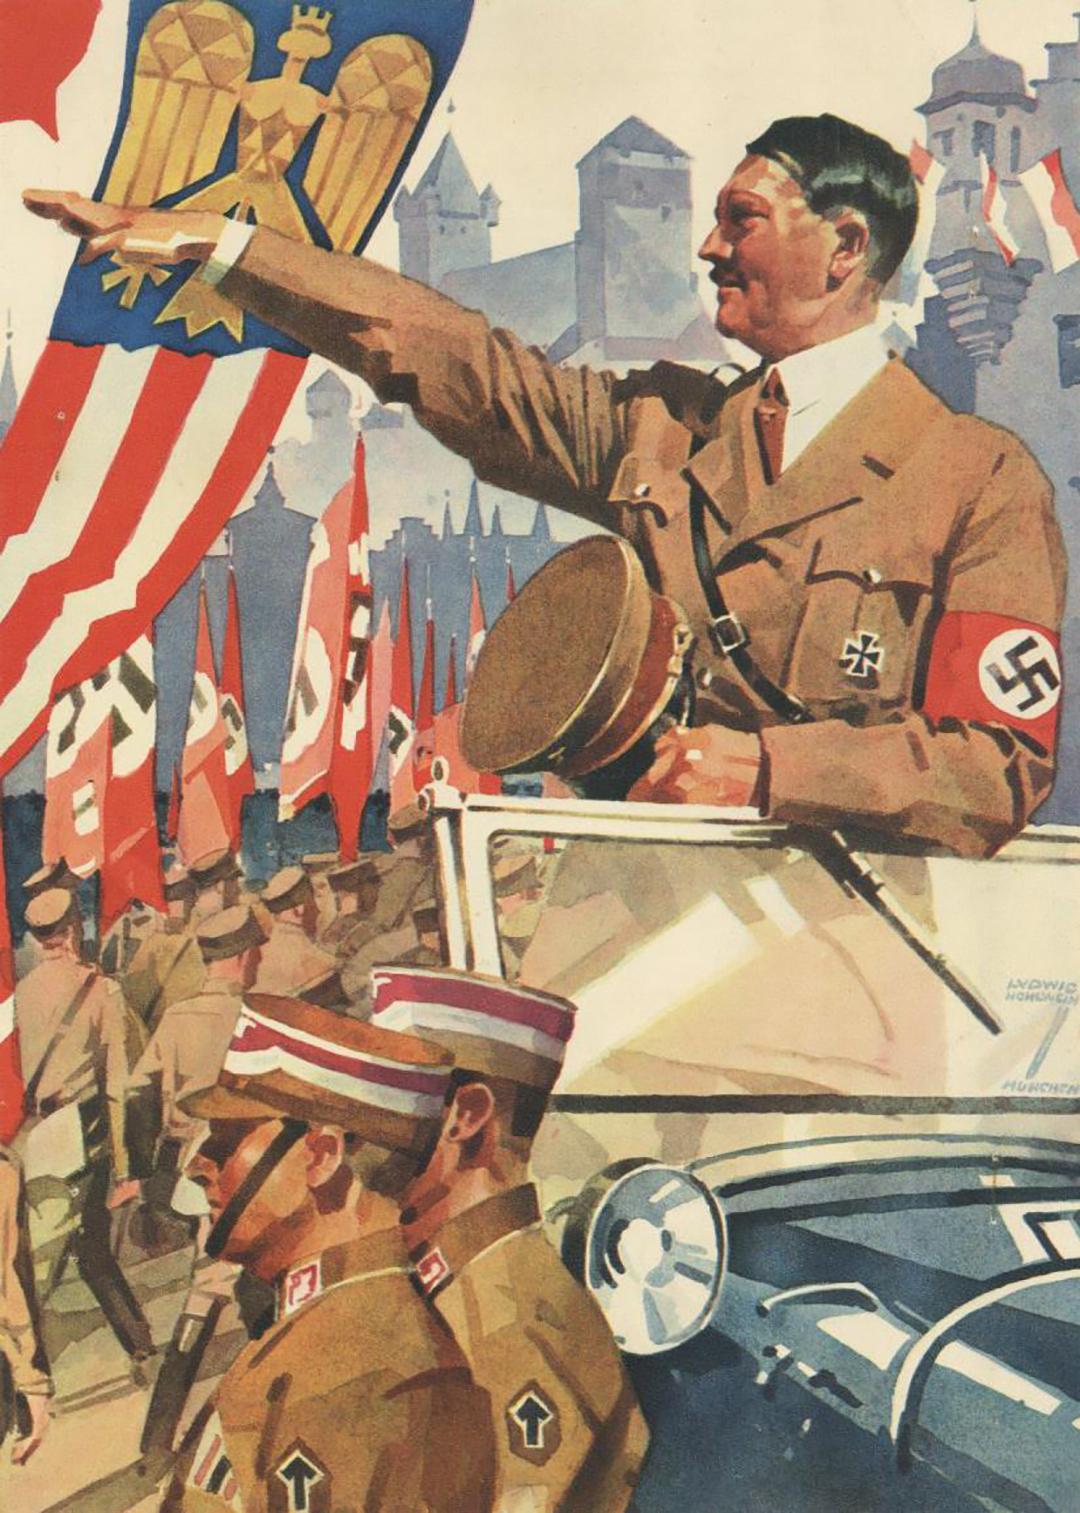 A painting from the front cover of "Deutsche Reichspost" (German Empire Mail), painted in 1937 by Ludwig Hohlwein. (Public Domain)